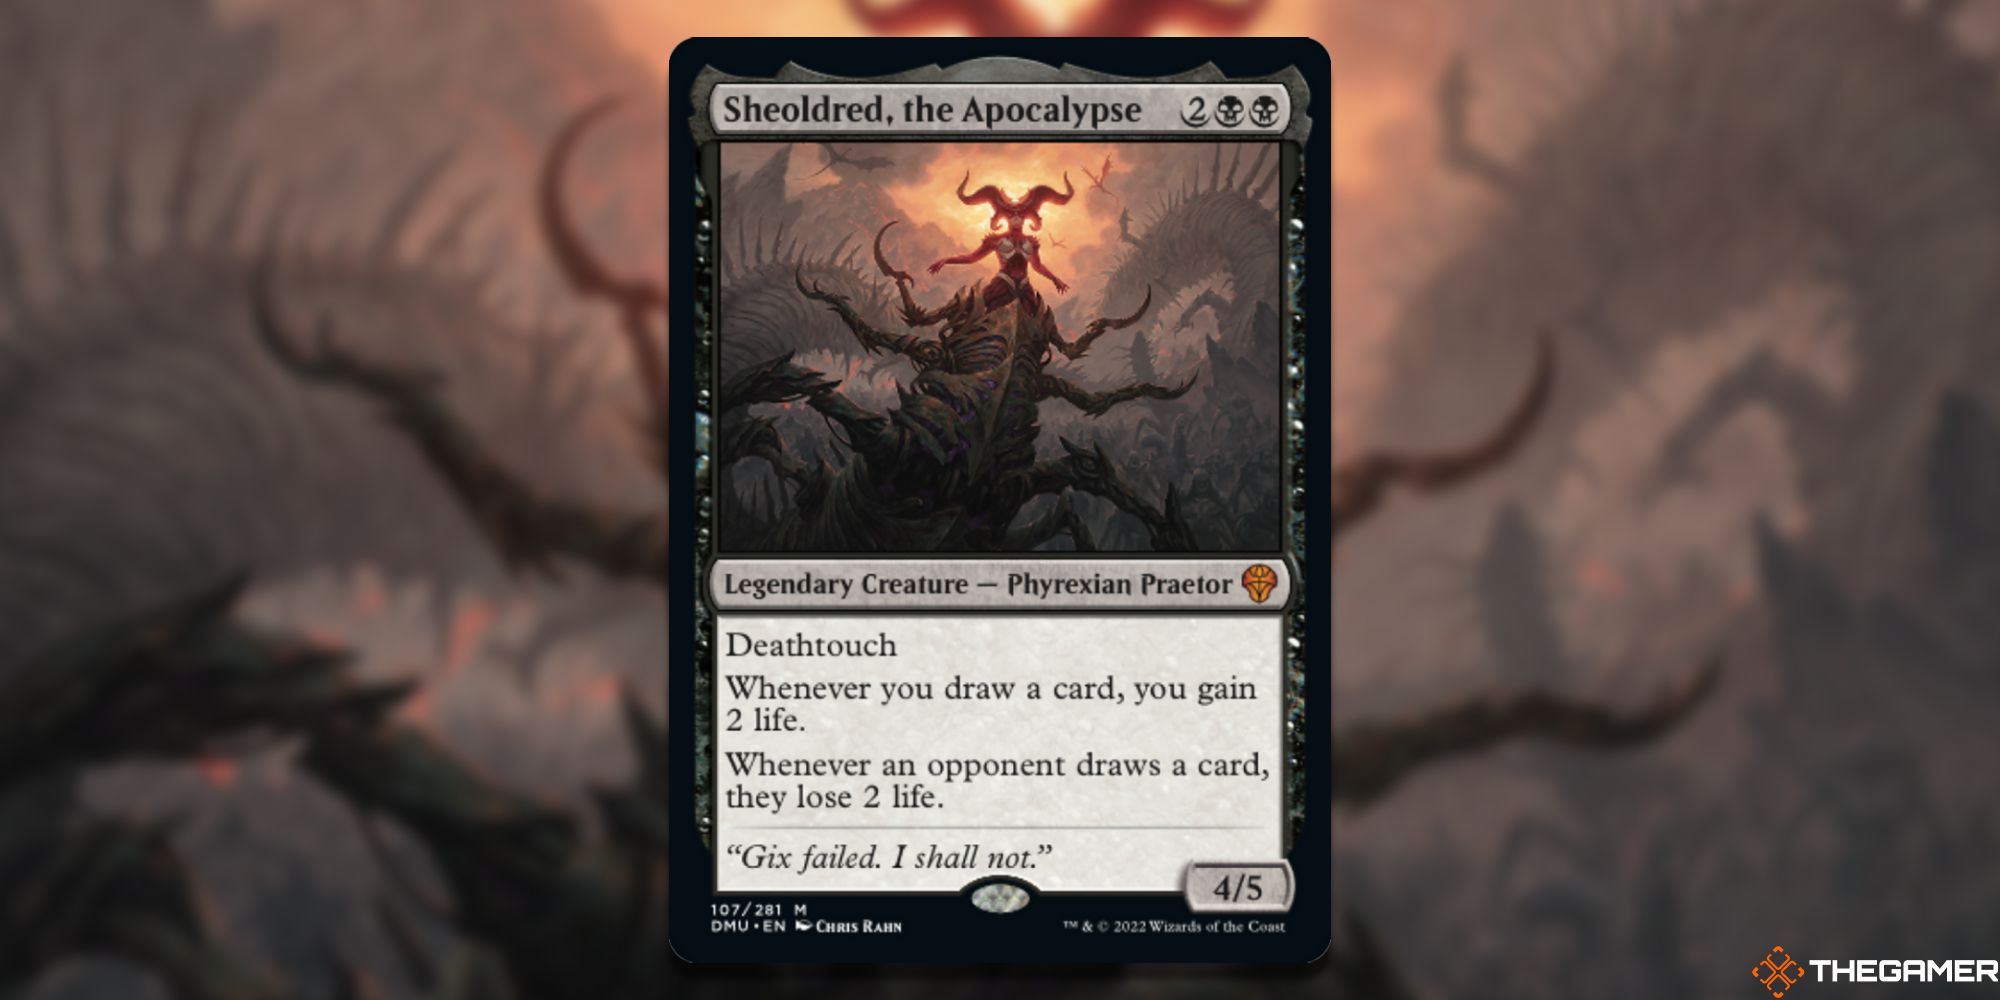 Card image for Sheoldred the Apocalypse from Magic: The Gathering, with art by Chris Rahn